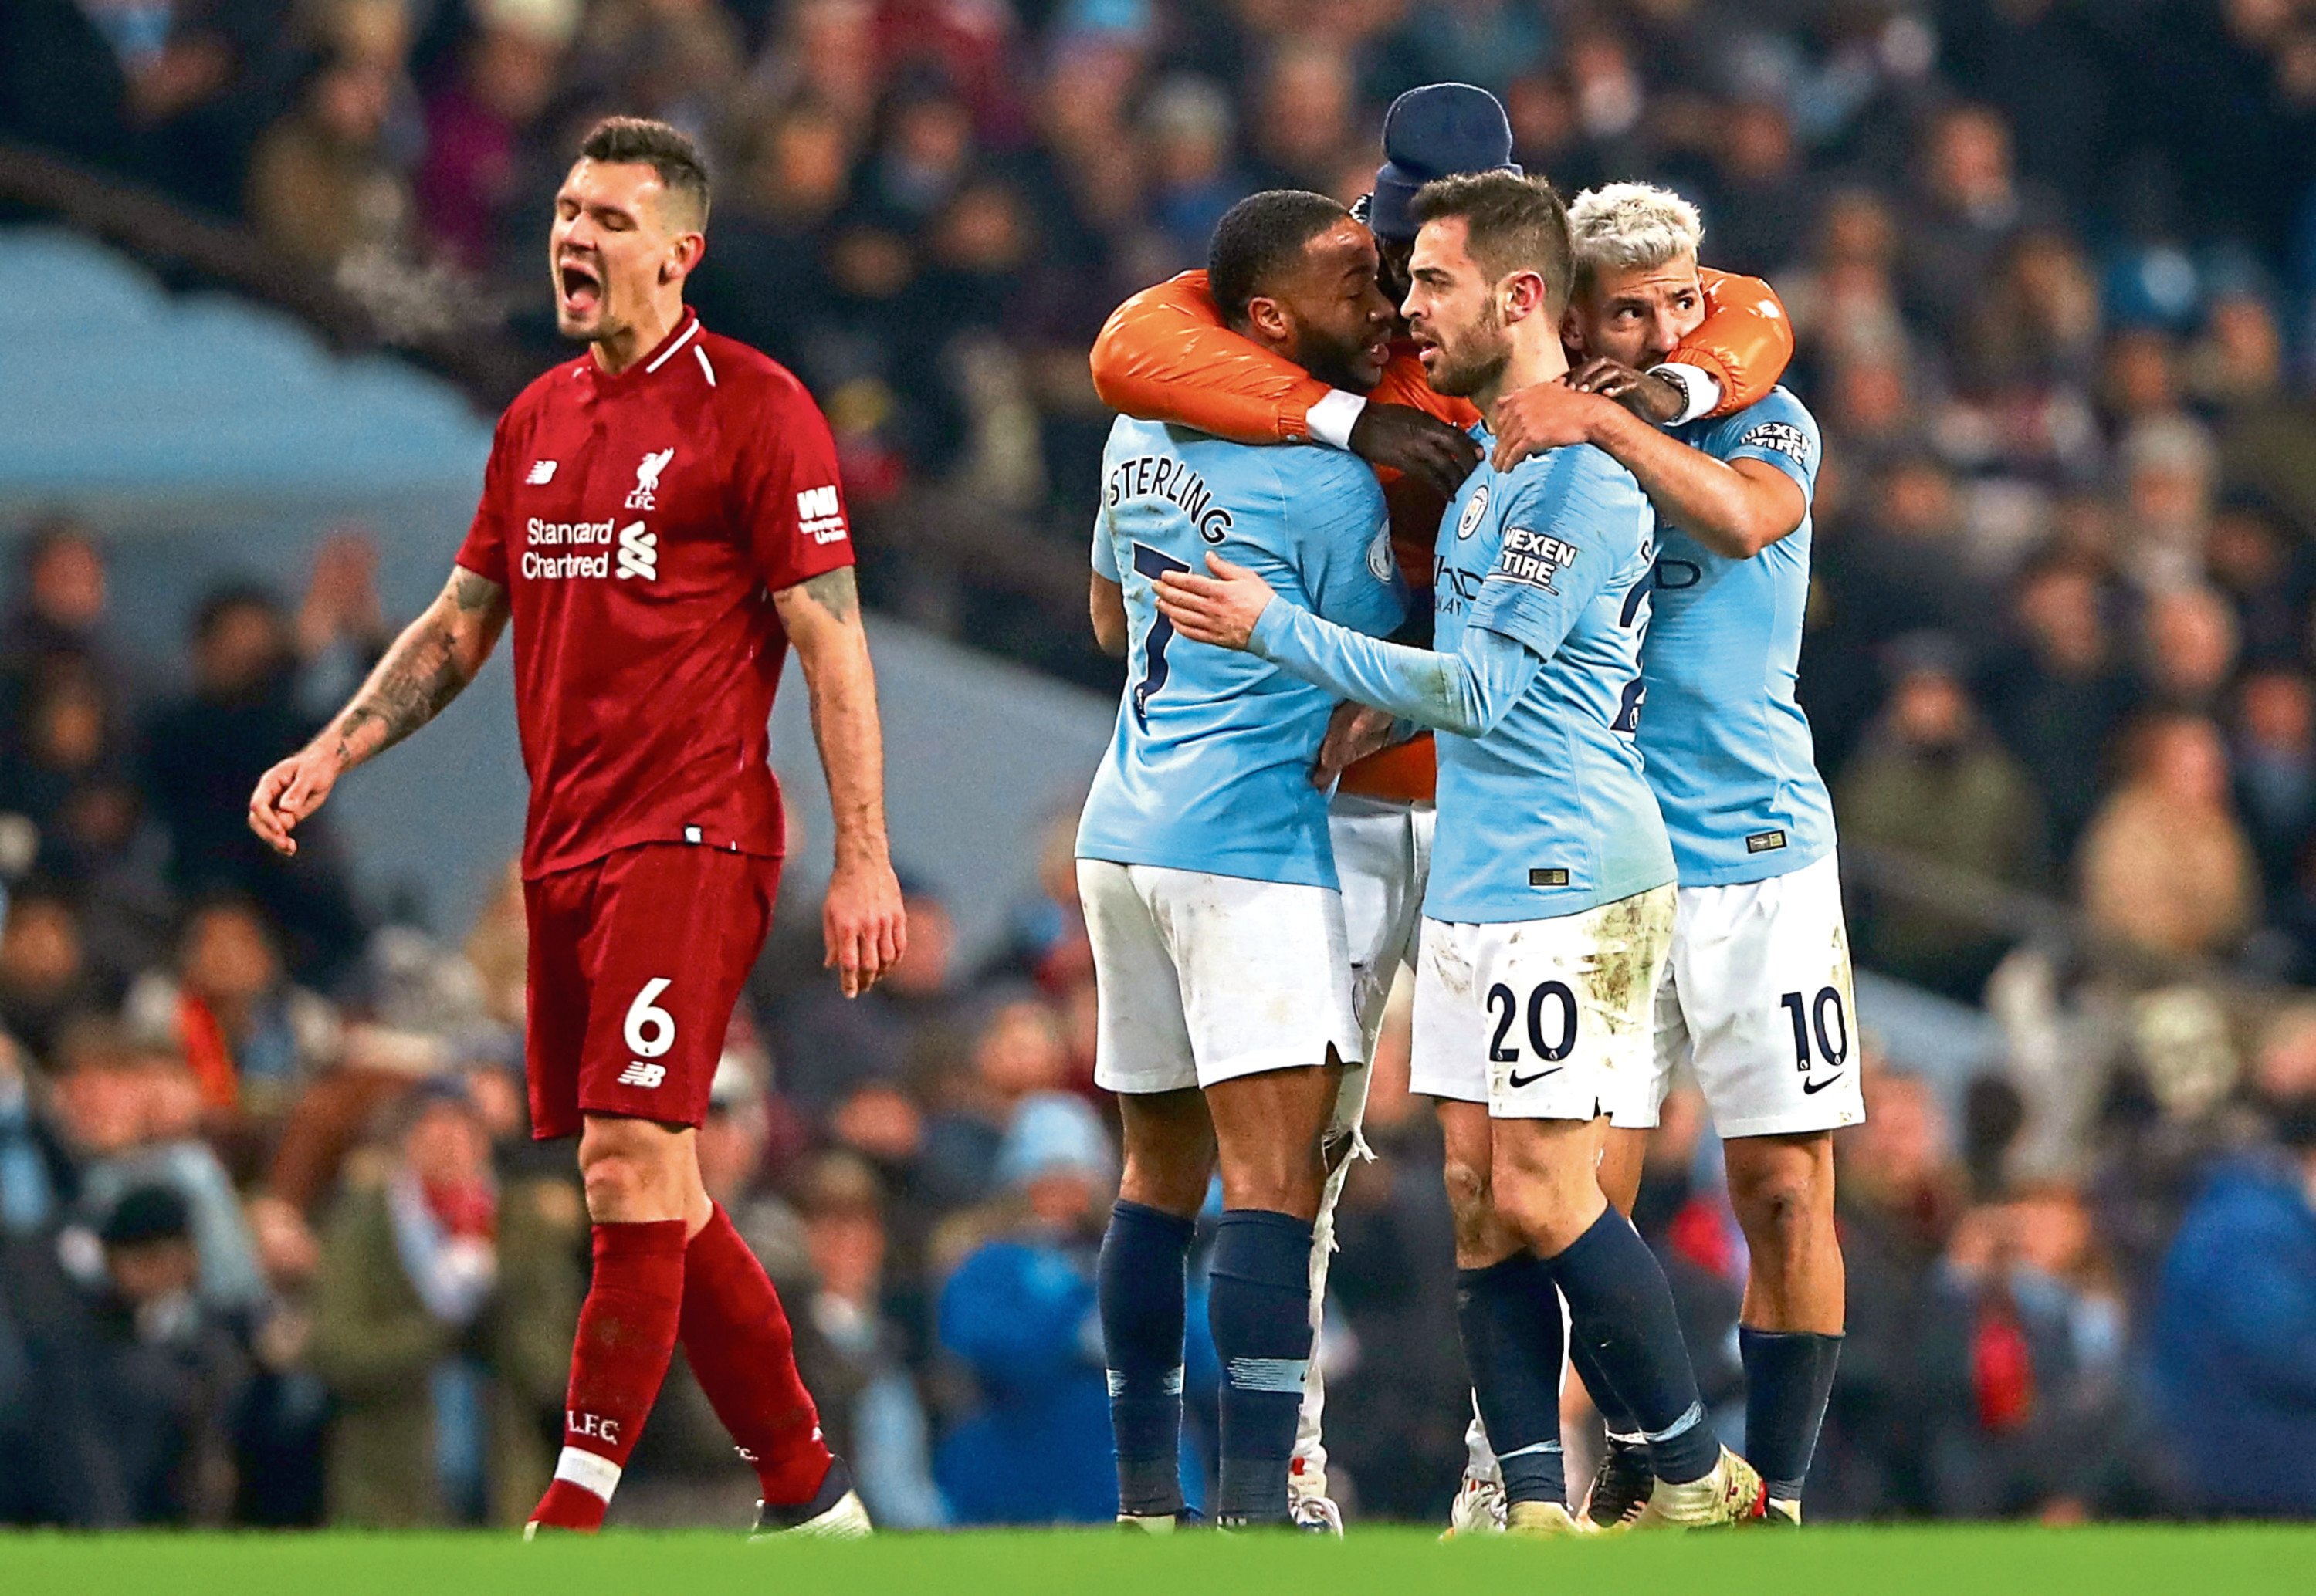 Manchester City’s stars celebrate Thursday night’s win as Liverpool’s Dejan Lovren suffers (Photo by Clive Brunskill/Getty Images)